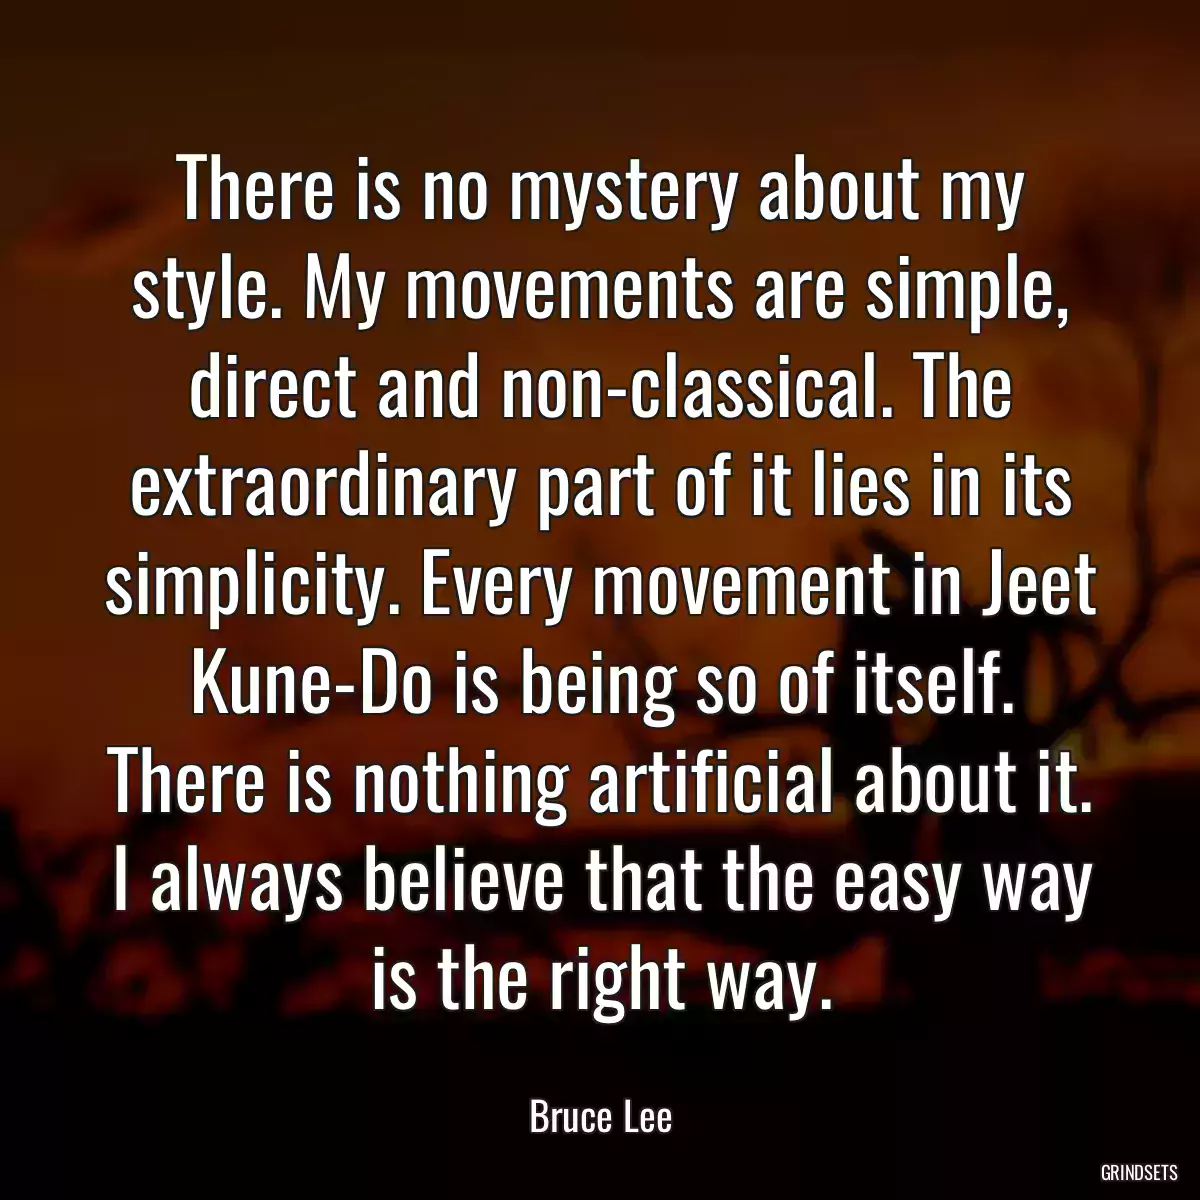 There is no mystery about my style. My movements are simple, direct and non-classical. The extraordinary part of it lies in its simplicity. Every movement in Jeet Kune-Do is being so of itself. There is nothing artificial about it. I always believe that the easy way is the right way.